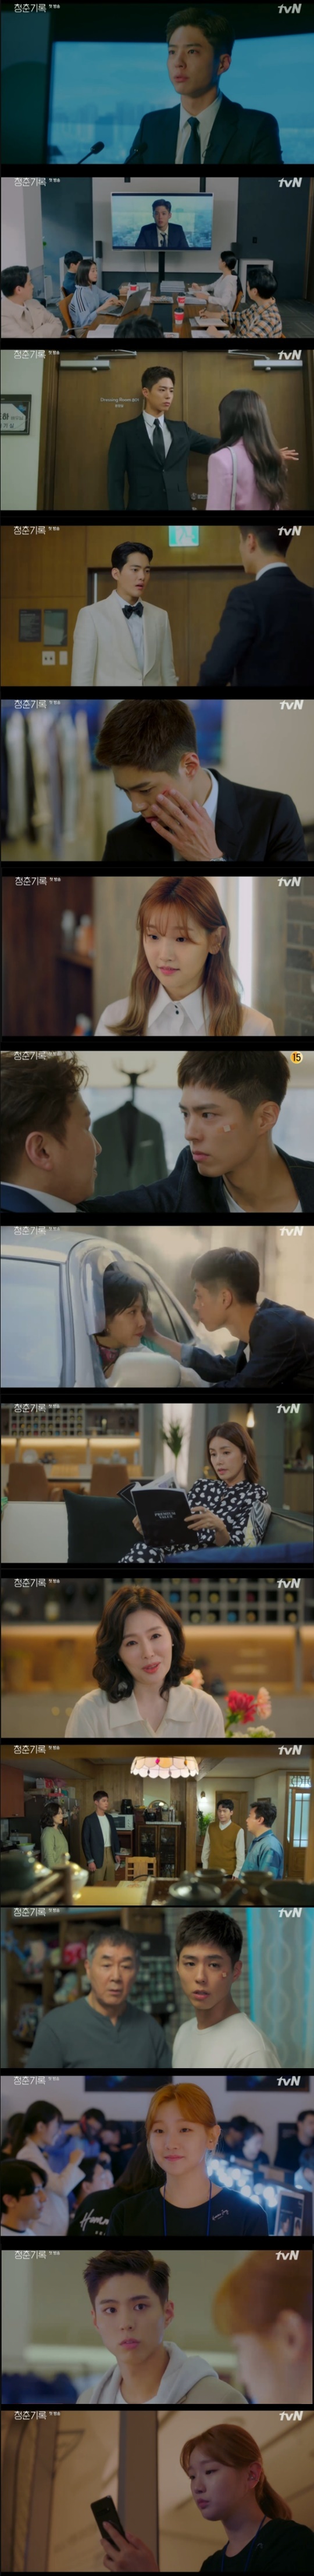 Park Bo-gum has his first meeting with Park So-damIn the TVN Monday drama Record of Youth (director Ahn Gil-ho, playwright Ha Myung-hee), which aired on September 7, Sa Hye-joon (Park Bo-gum), a model who dreams of acting as an actor, was pictured worrying about acting as an Army.On this day, a representative of a film company worried about casting by watching the performance of Sa Hye-joon.Sa Hye-joon did a security part-time job in front of the waiting room of top actor Park Do-ha (Kim Gun-woo), and failed to prevent the make-up artist Lee Bo-ra (Kim Hye-yoon) from entering the barracks.Weve met for five years, but do we have to treat it like this? Were breaking up now, Ibora told Park Do-ha.I am a good person. Park Do-ha slapped Park Do-ha, who hit her cheek with a smile on Sa Hye-joon, who could not stop Lee Bora.How did this happen? he said. My dream is now standing in front of me, he said.I can not afford to have a lot of time for me. Kim Lee Young (Shin Ae-ra) asked Park So-dam to make up, and his boss, who saw it, said he took his customer away.Can not you do it? Once again, I will make you feel like I have sucked honey when I am a big company, said An Jeong-ha.Fellow Won Hye-na (Cho Yu-jung) comforted An Jeong-ha in the Tangbi room and said, Let her follow the show.I will meet you someday when I get stable. I took out my cell phone. I watched Sa Hye-joons stable SNS and said, Hye Jun-ah.You hold on well and ITZY, he told himself.Sa Hye-joon asked Lee to terminate the contract and said, I do not have to pay for it. I will think of it as a price to break up with someone like you. Lee said, I have been working as a model for seven years.You can be like Haehyo (Mr. Byun Woo-suk), said BIA, and thats what youre impatient about. So, Sa Hye-joon said, He is my friend.I never tried to be like him. When Sa Hye-joon tried to leave the office, he cursed, Youll live your whole life with a perfect price.Han Ae-sook (Ha Hee-ra) worked as a housekeeper at the house of Kim Lee Young (Shin Ae-ra).Kim Lee Young asked Han Ae-sook to go home for laundry and gave a fee of 50,000 won.Han Ae-sooks family set up a place to celebrate the employment of their eldest son, Sa Kyung-joon (Lee Jae-won).When one of the family asked Sa Hye-joon about the fact that the Army warrant came out, Han Ae-sook worried that he would blow a blood breeze today.When Han Ae-sook showed her the notice of admission, Sa Hye-joon said, I auditioned for the movie this time, but if it works, I think it is the fate of heaven and I will postpone it once more.So, Lee Jae-won said, Lets go to the Army soon. You are a brute of my house. Sa Hye-joon said, Did your mother think so?Did your family evaluate you from behind? asked Lingnan (Park Soo-young), who nagged, Youre a brute, go to Army.When his grandfather, Sam Min-ki (Han Jin-hee), stopped him, Lingnan said, Ive known Hye-joon since he said he was like his father and paid for his character.I finally meet tomorrow, he said to himself, I am a longtime fan of yours and I always support you.The next day, I took care of Sa Hye-joons makeup, which was stable, but I could not speak properly with trembling mind.When the next shooter gave a mask pack to Won Hae Hyos face, Sa Hye-joon asked, Why do not I do not do a mask? And said, I do not have to do it because my skin is good.So Sa Hye-joon smiled a little, and while the shooter was away for a while, Won Hae-hyo asked him to remove his lips pack, saying, We should go out for a while.I can not do it, said Sa Hye-joon and Won Hae-hyo, who asked again, and eventually he solved it instead of the shooter.At this time, the shooter appeared and shook the stable, apologized for the stability, and went out.